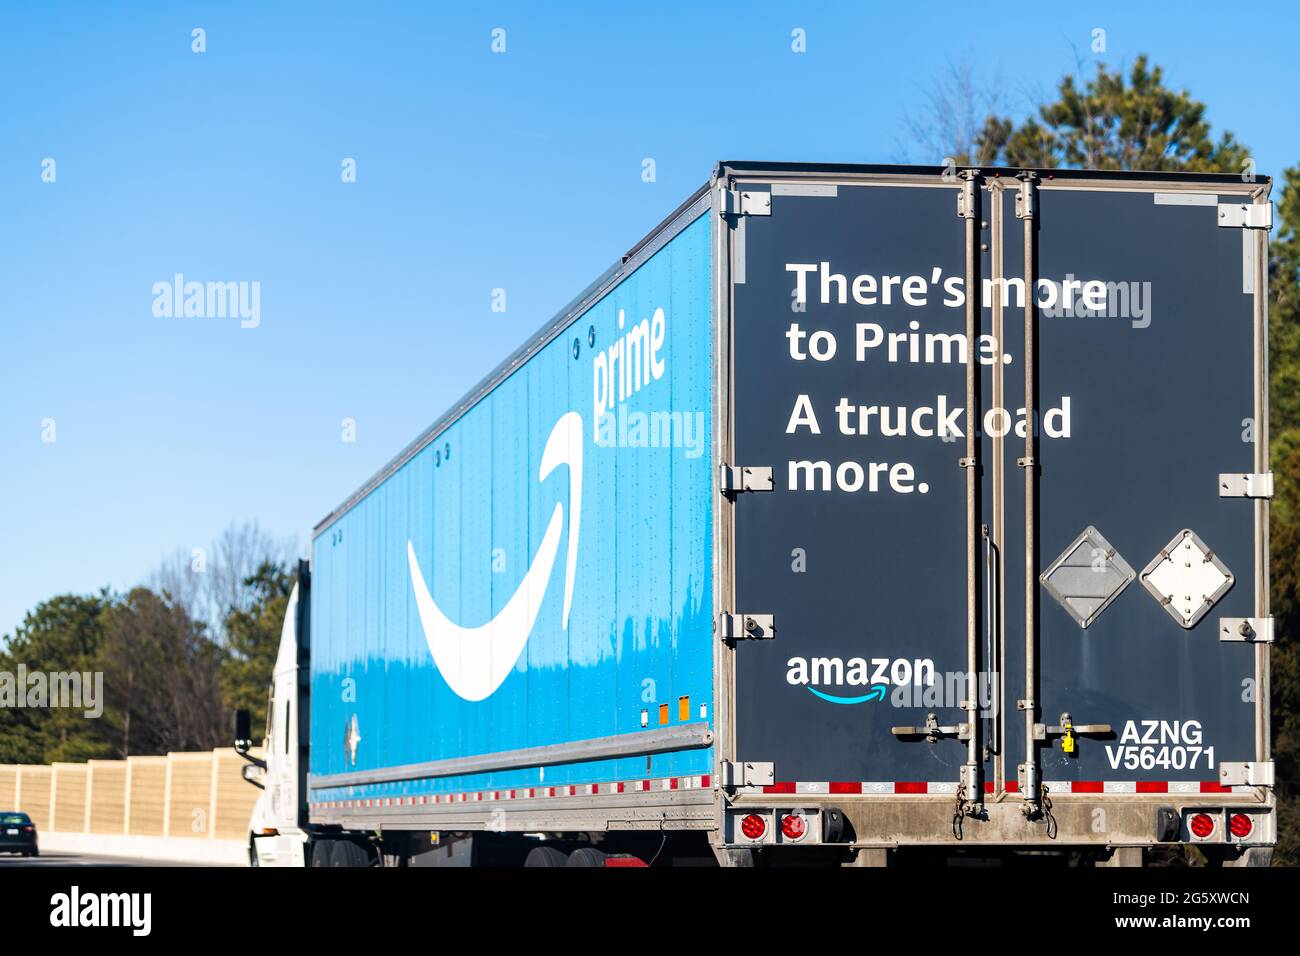 Richmond, USA - March 5, 2021: Highway road in Virginia with Amazon prime shipping delivery truck vehicle with blue Prime logo sign text Stock Photo